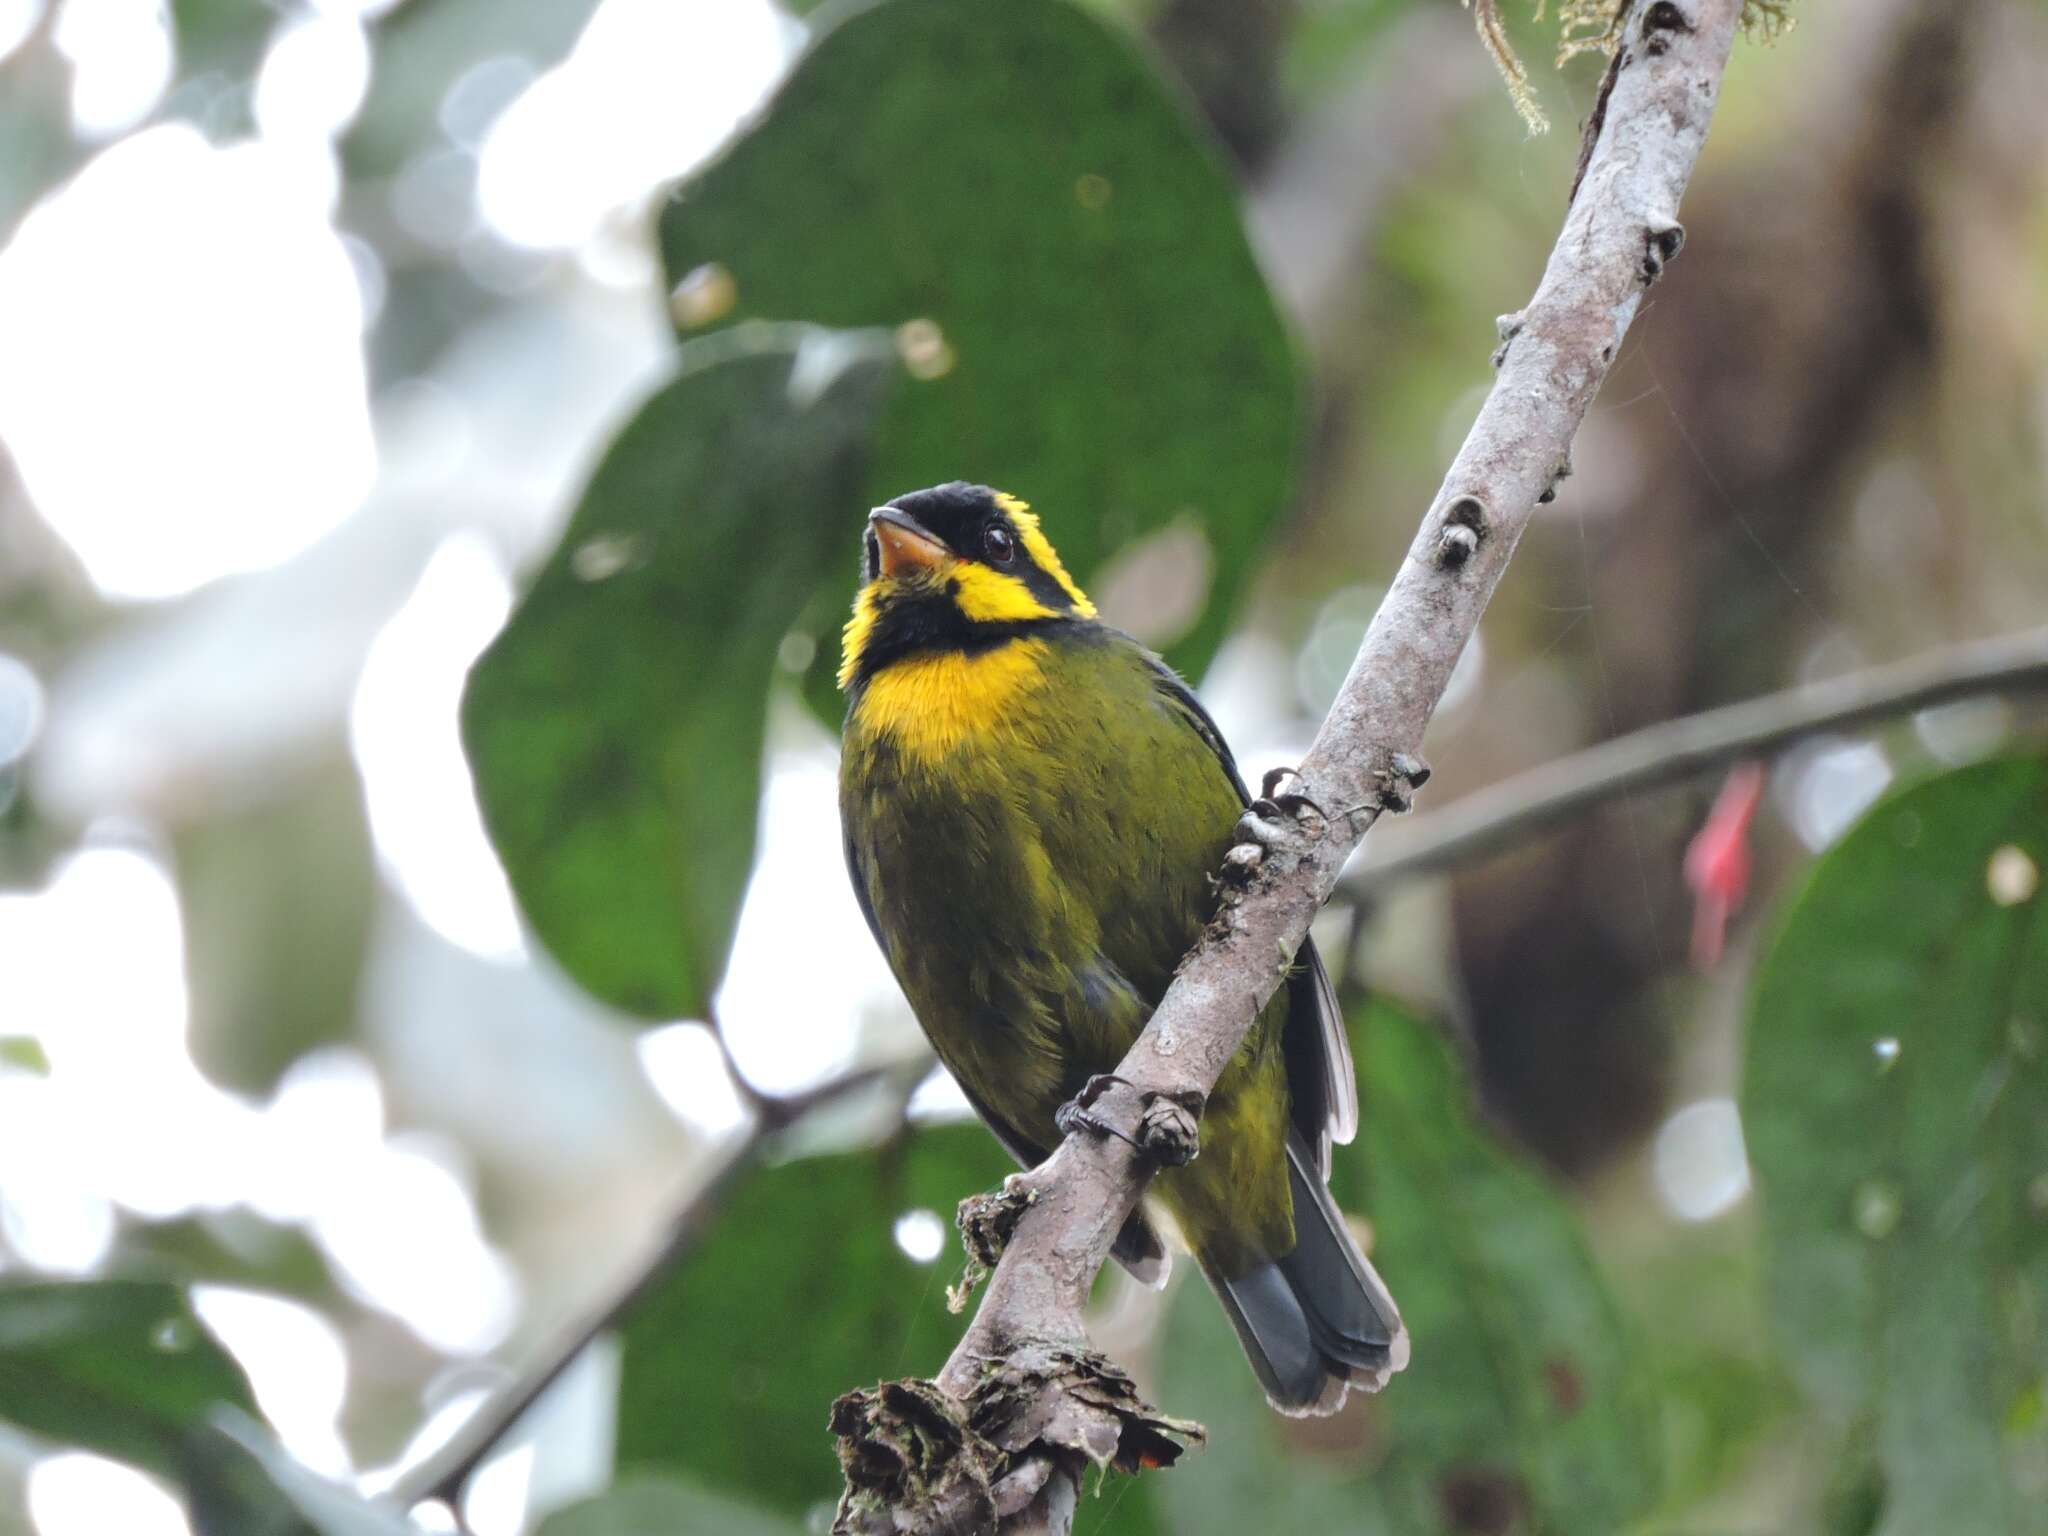 Image of Gold-ringed Tanager